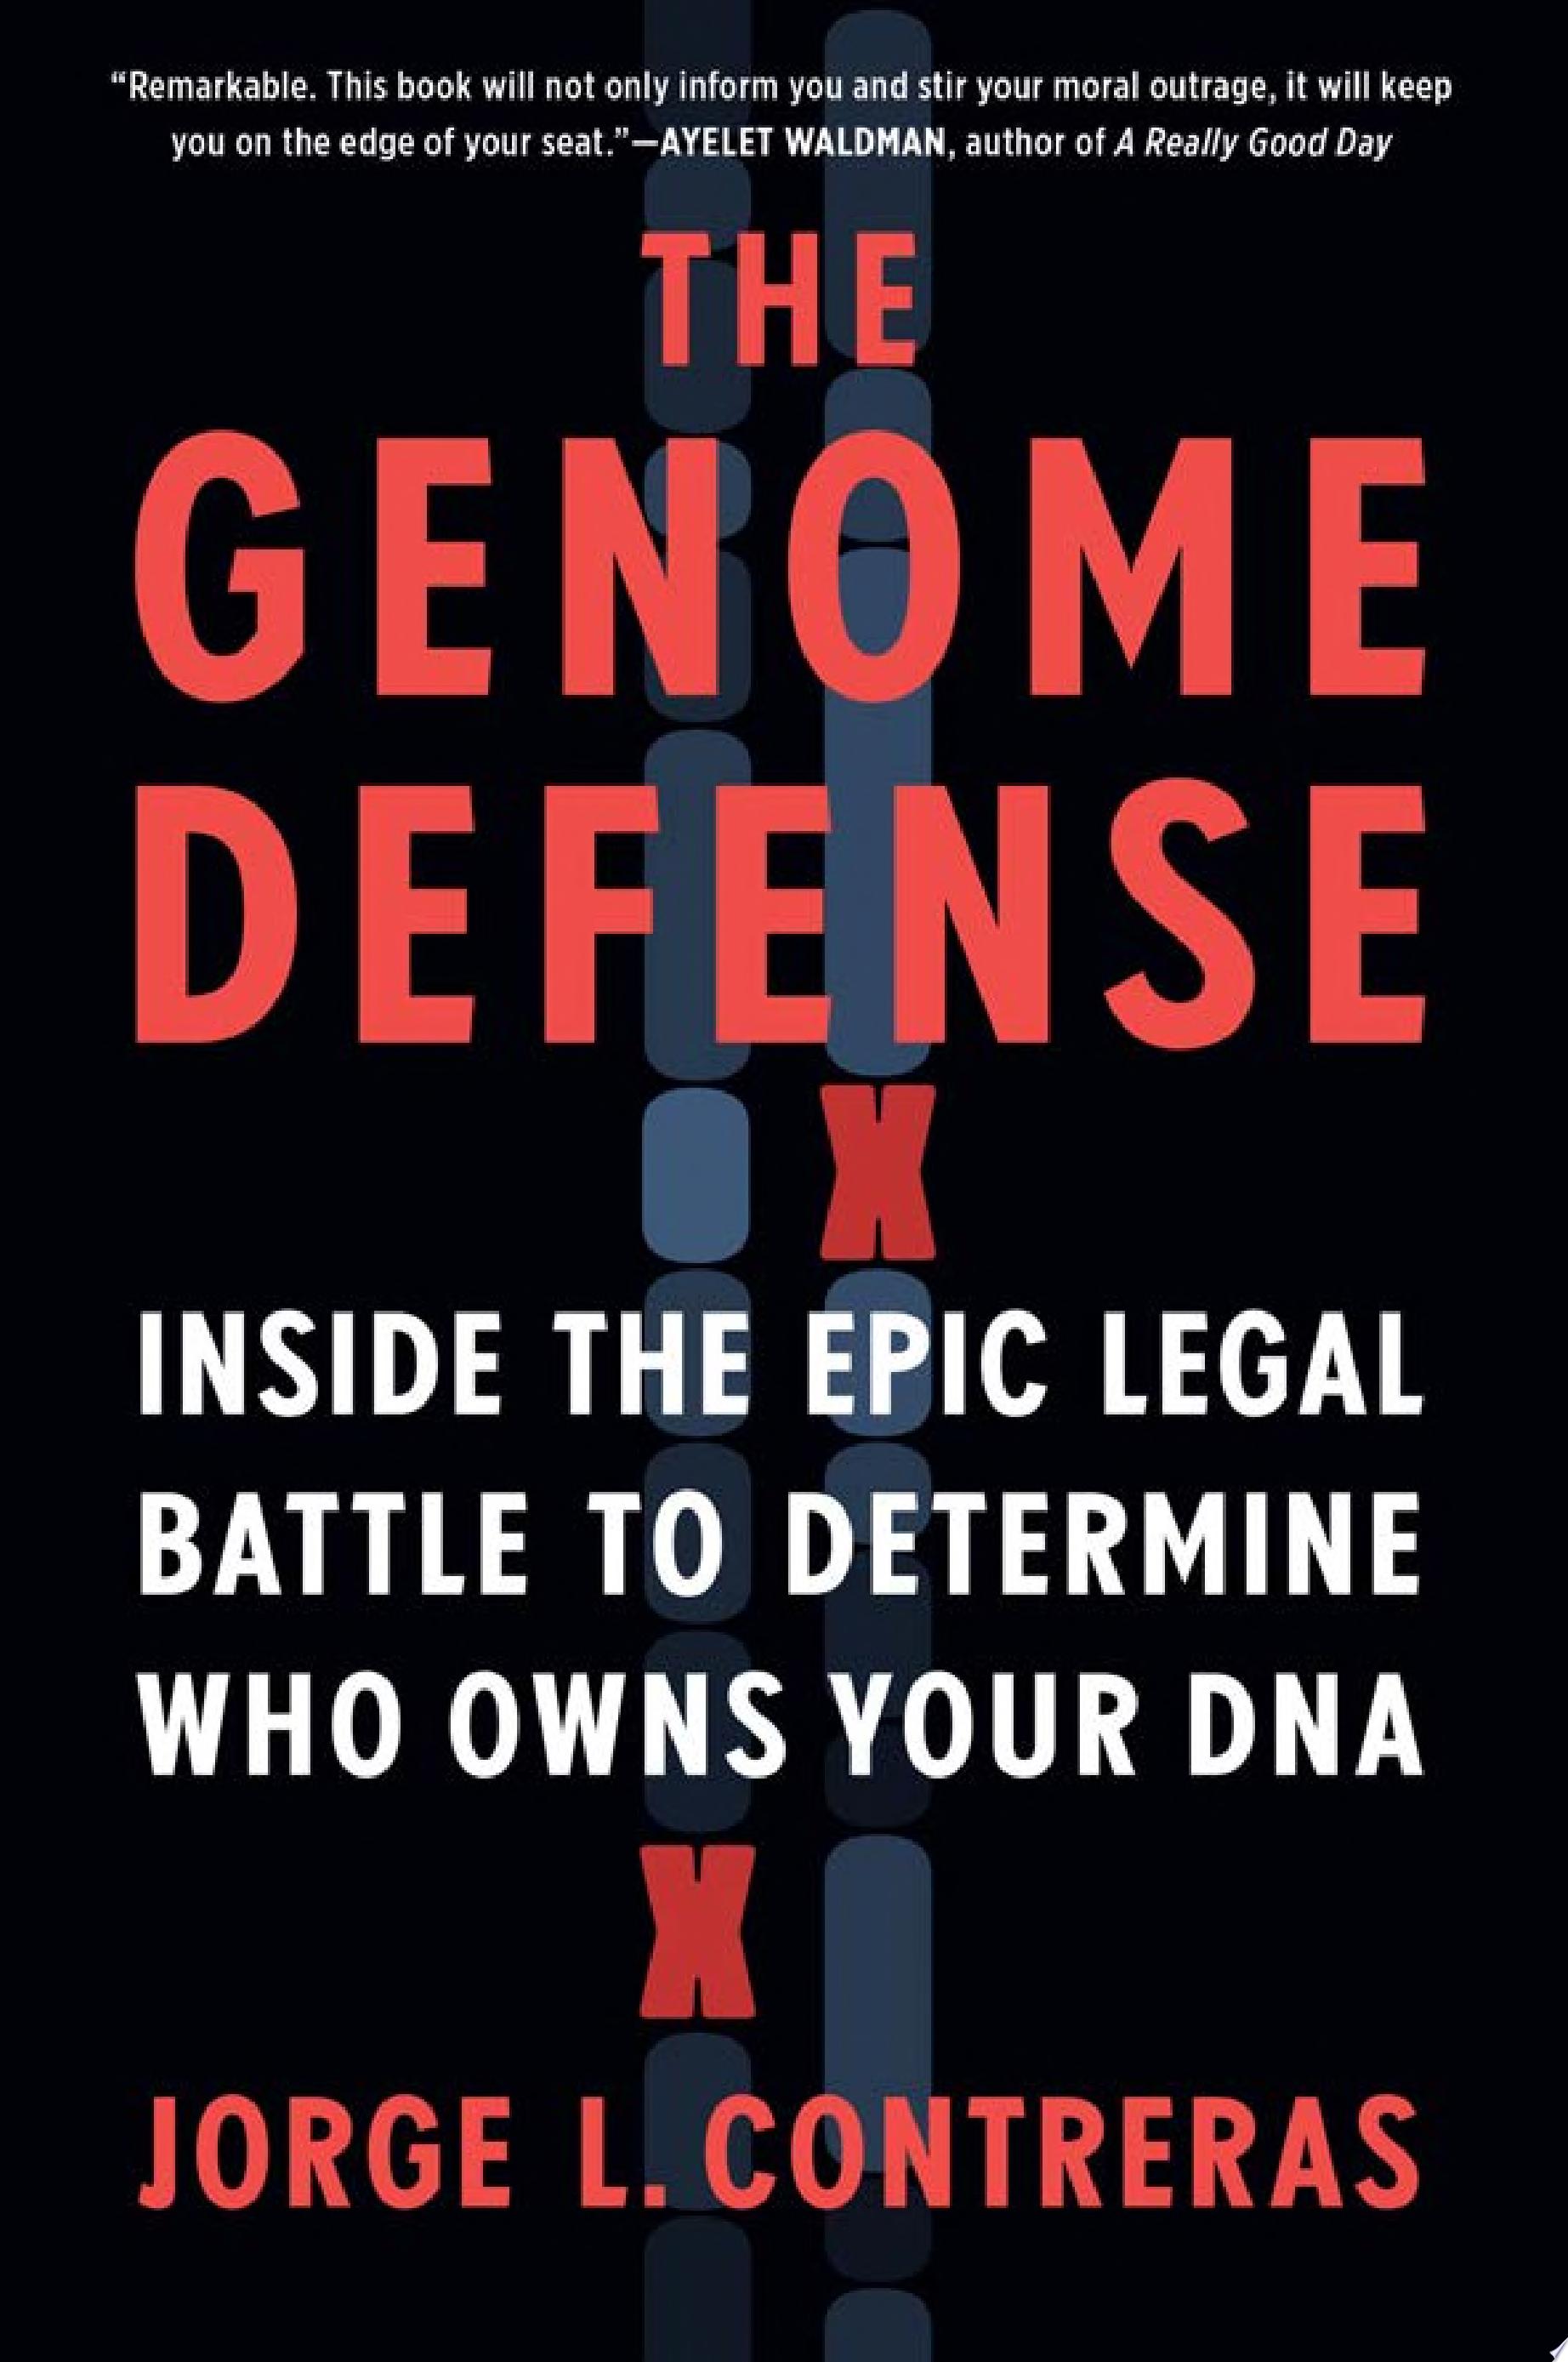 Image for "The Genome Defense"